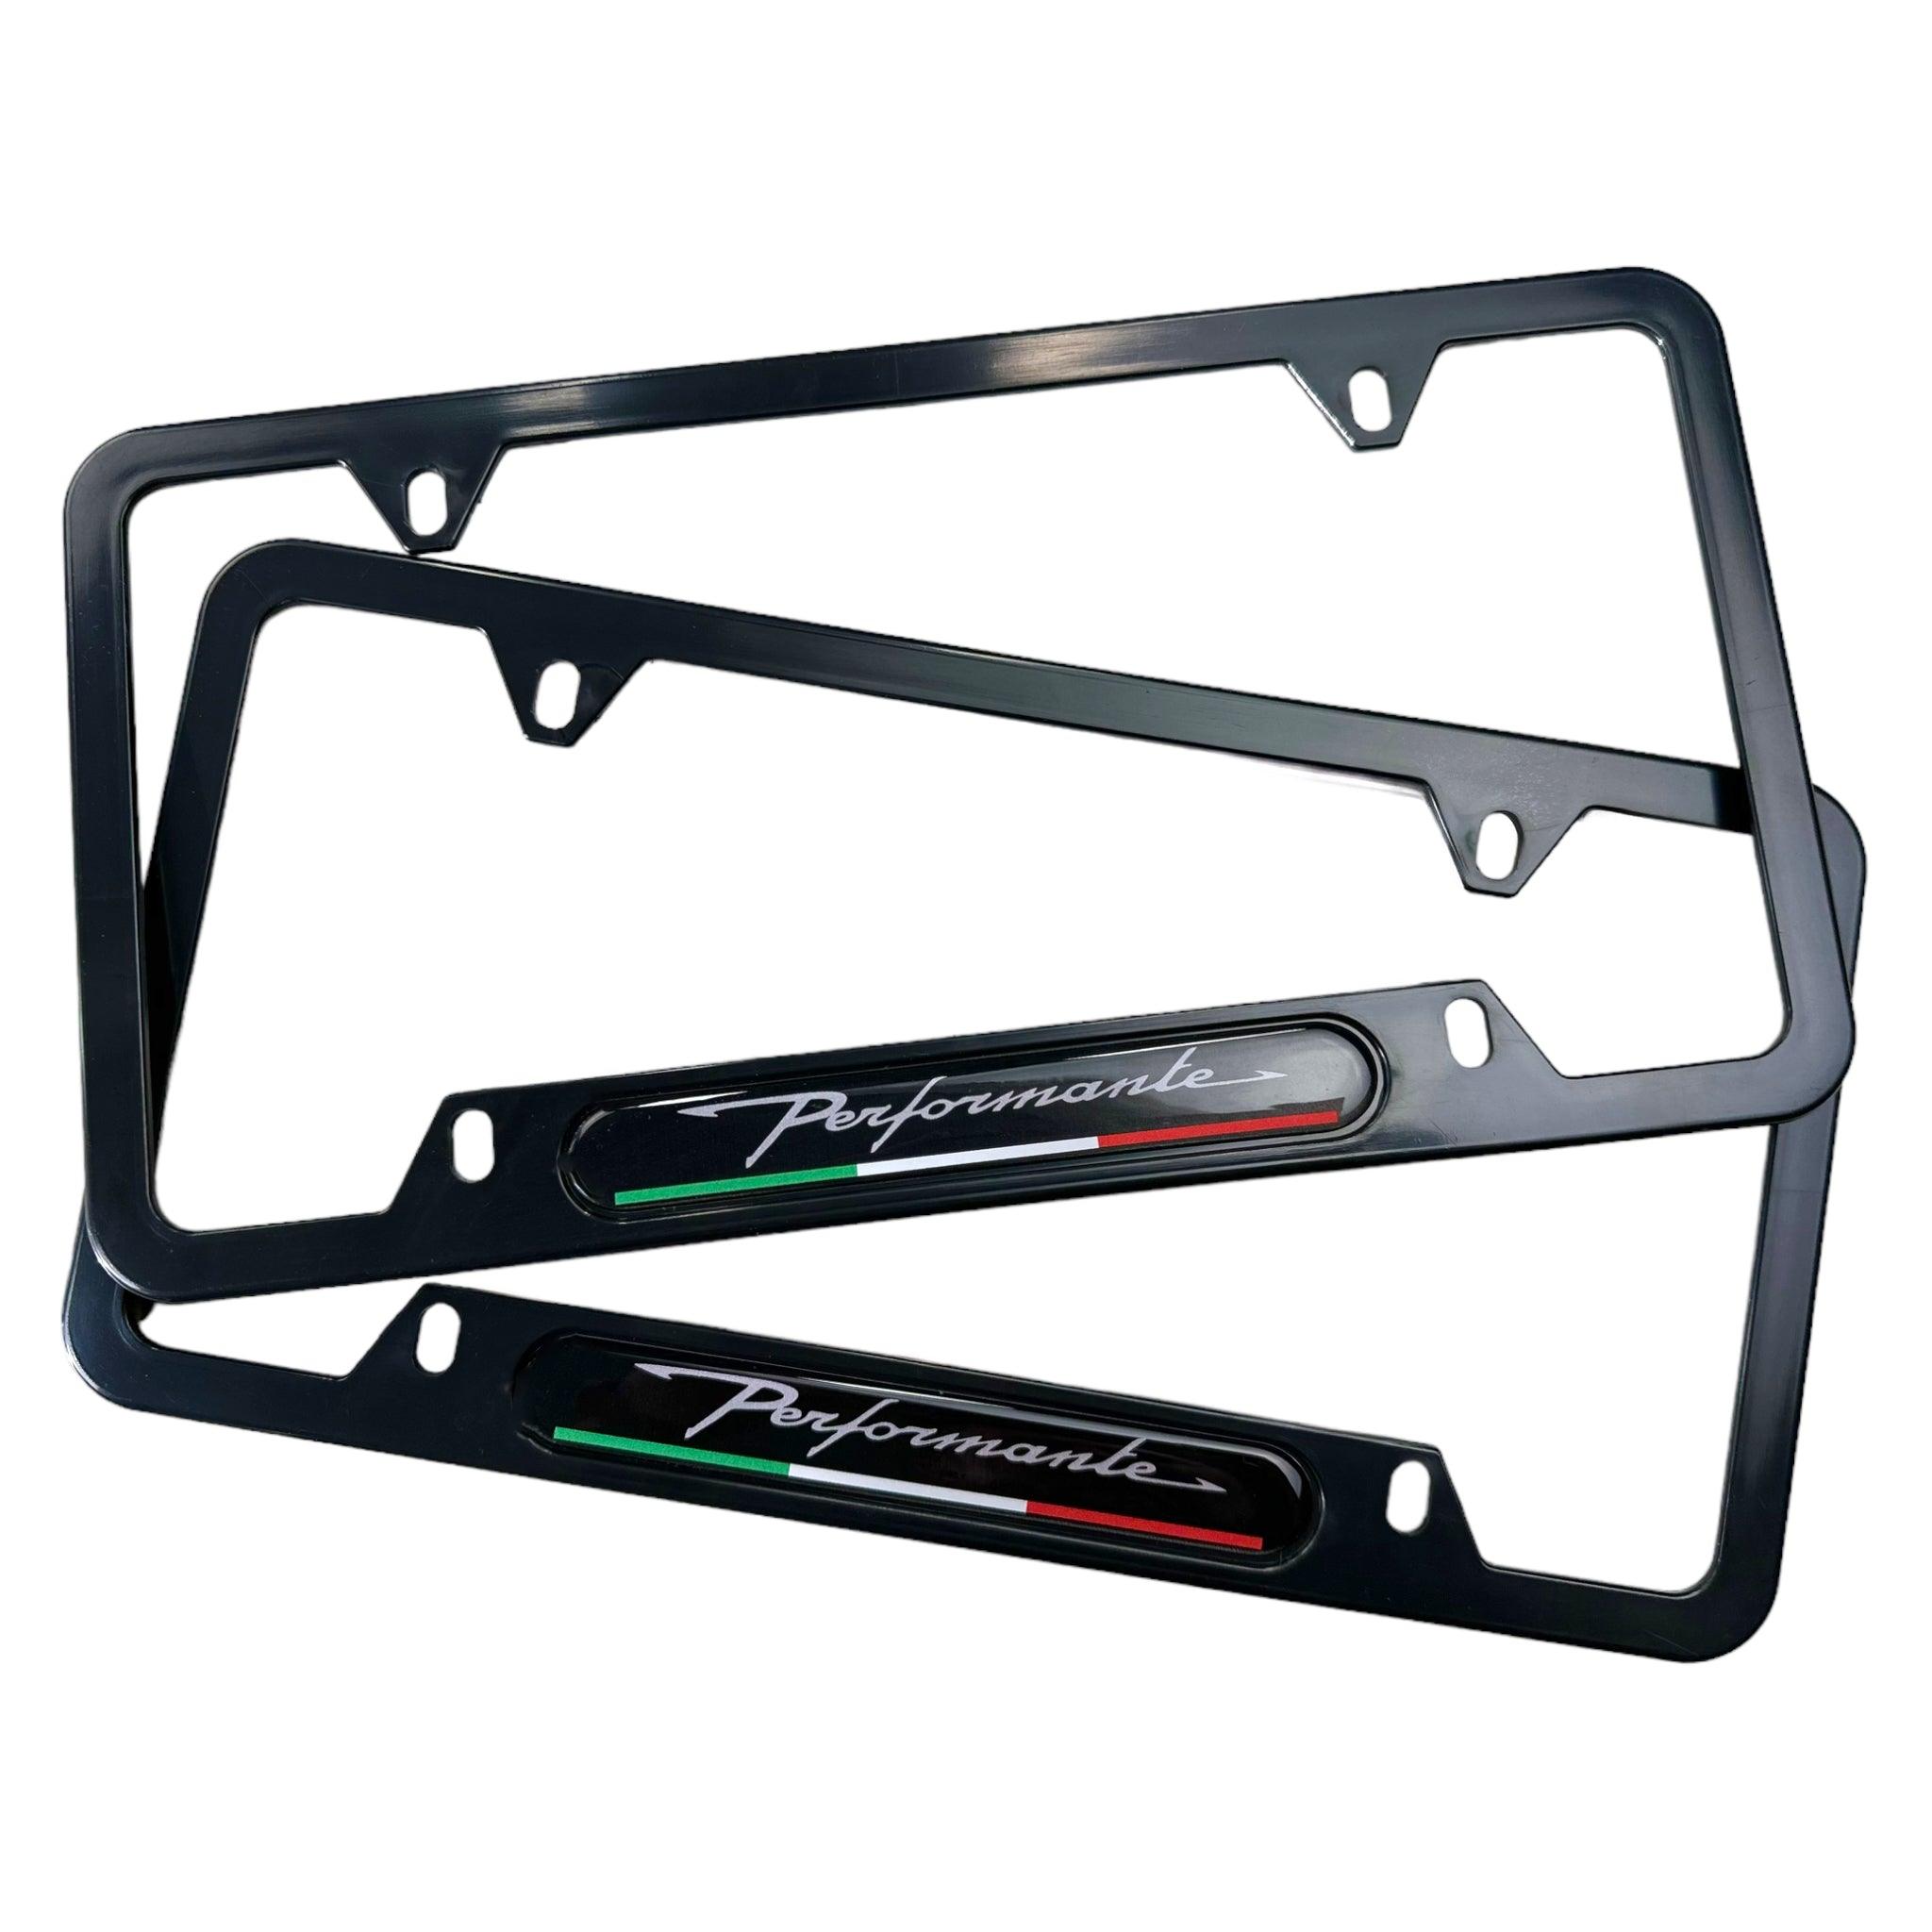 Autowin Number Plate Holder USA Standard Size Performante